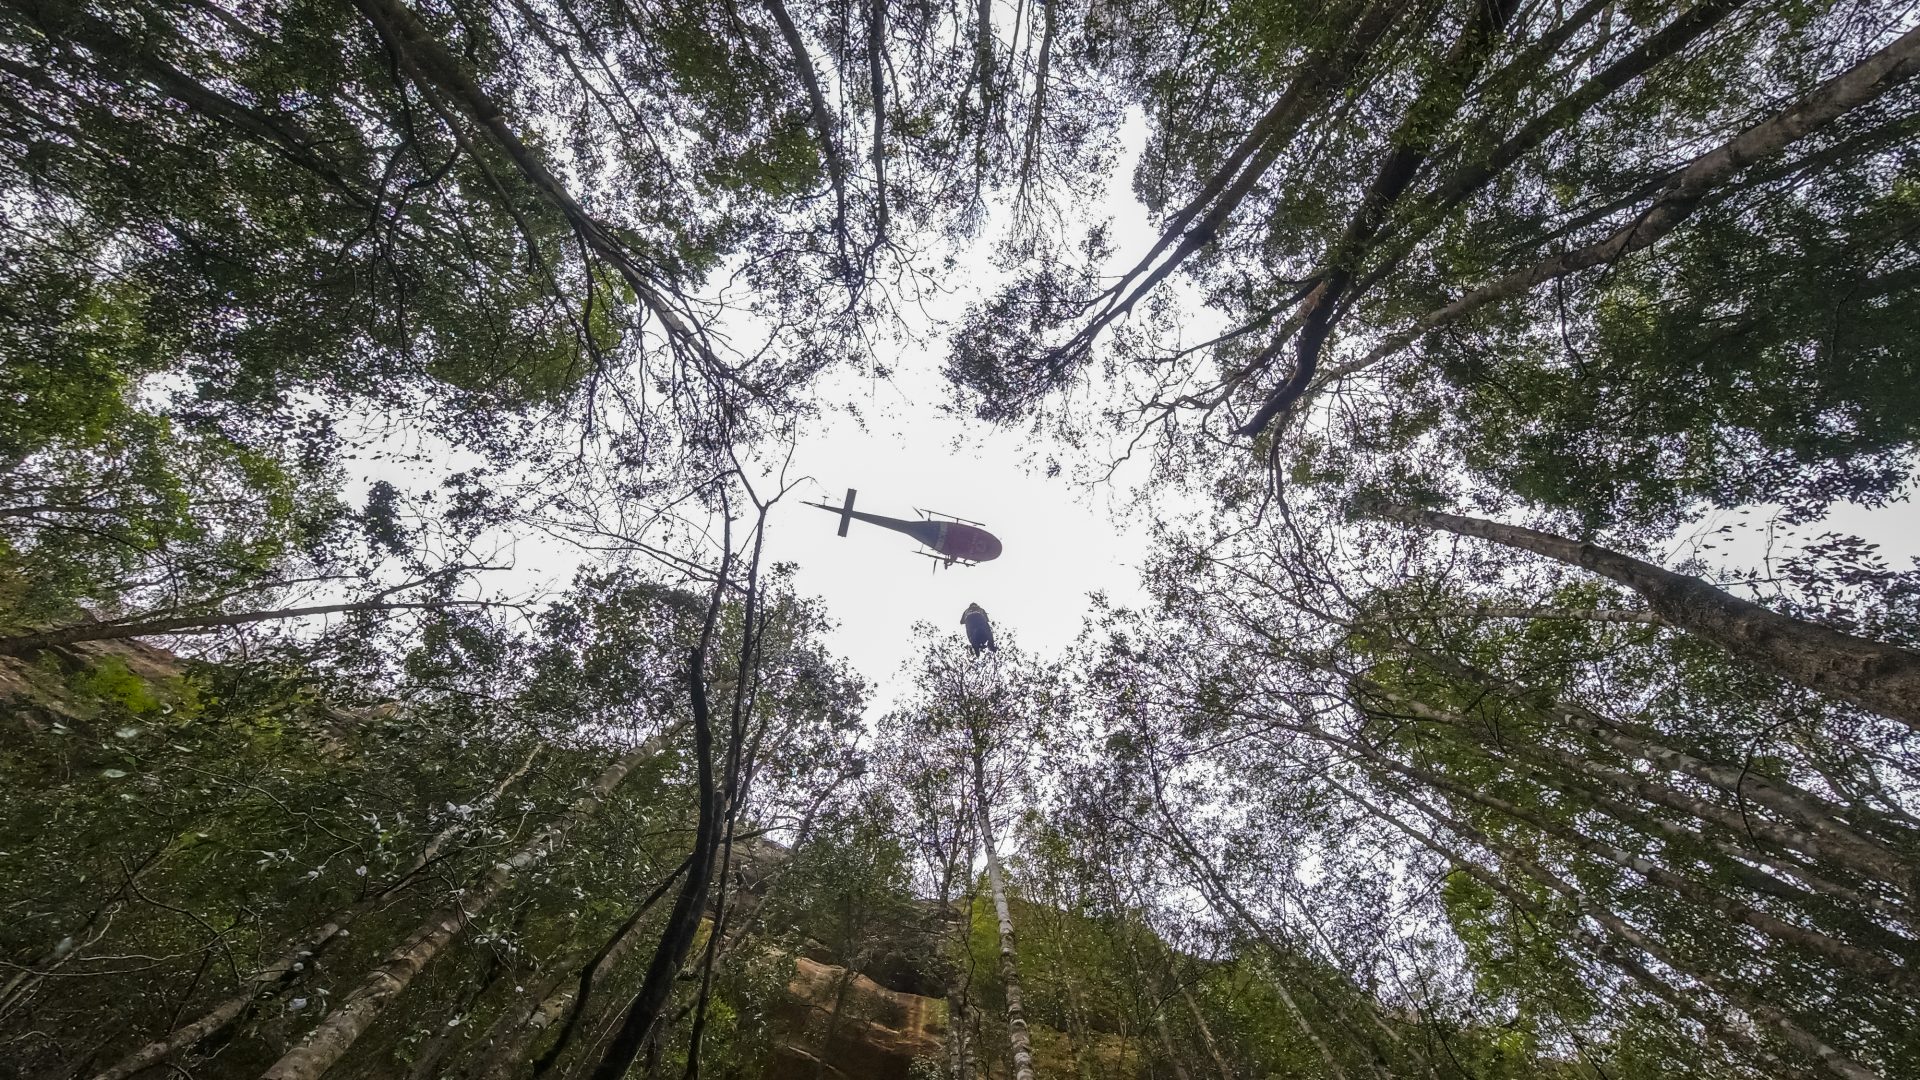 Firefighters winched their way from helicopters to the forest floor. The exact location of the groves is a carefully guarded secret.